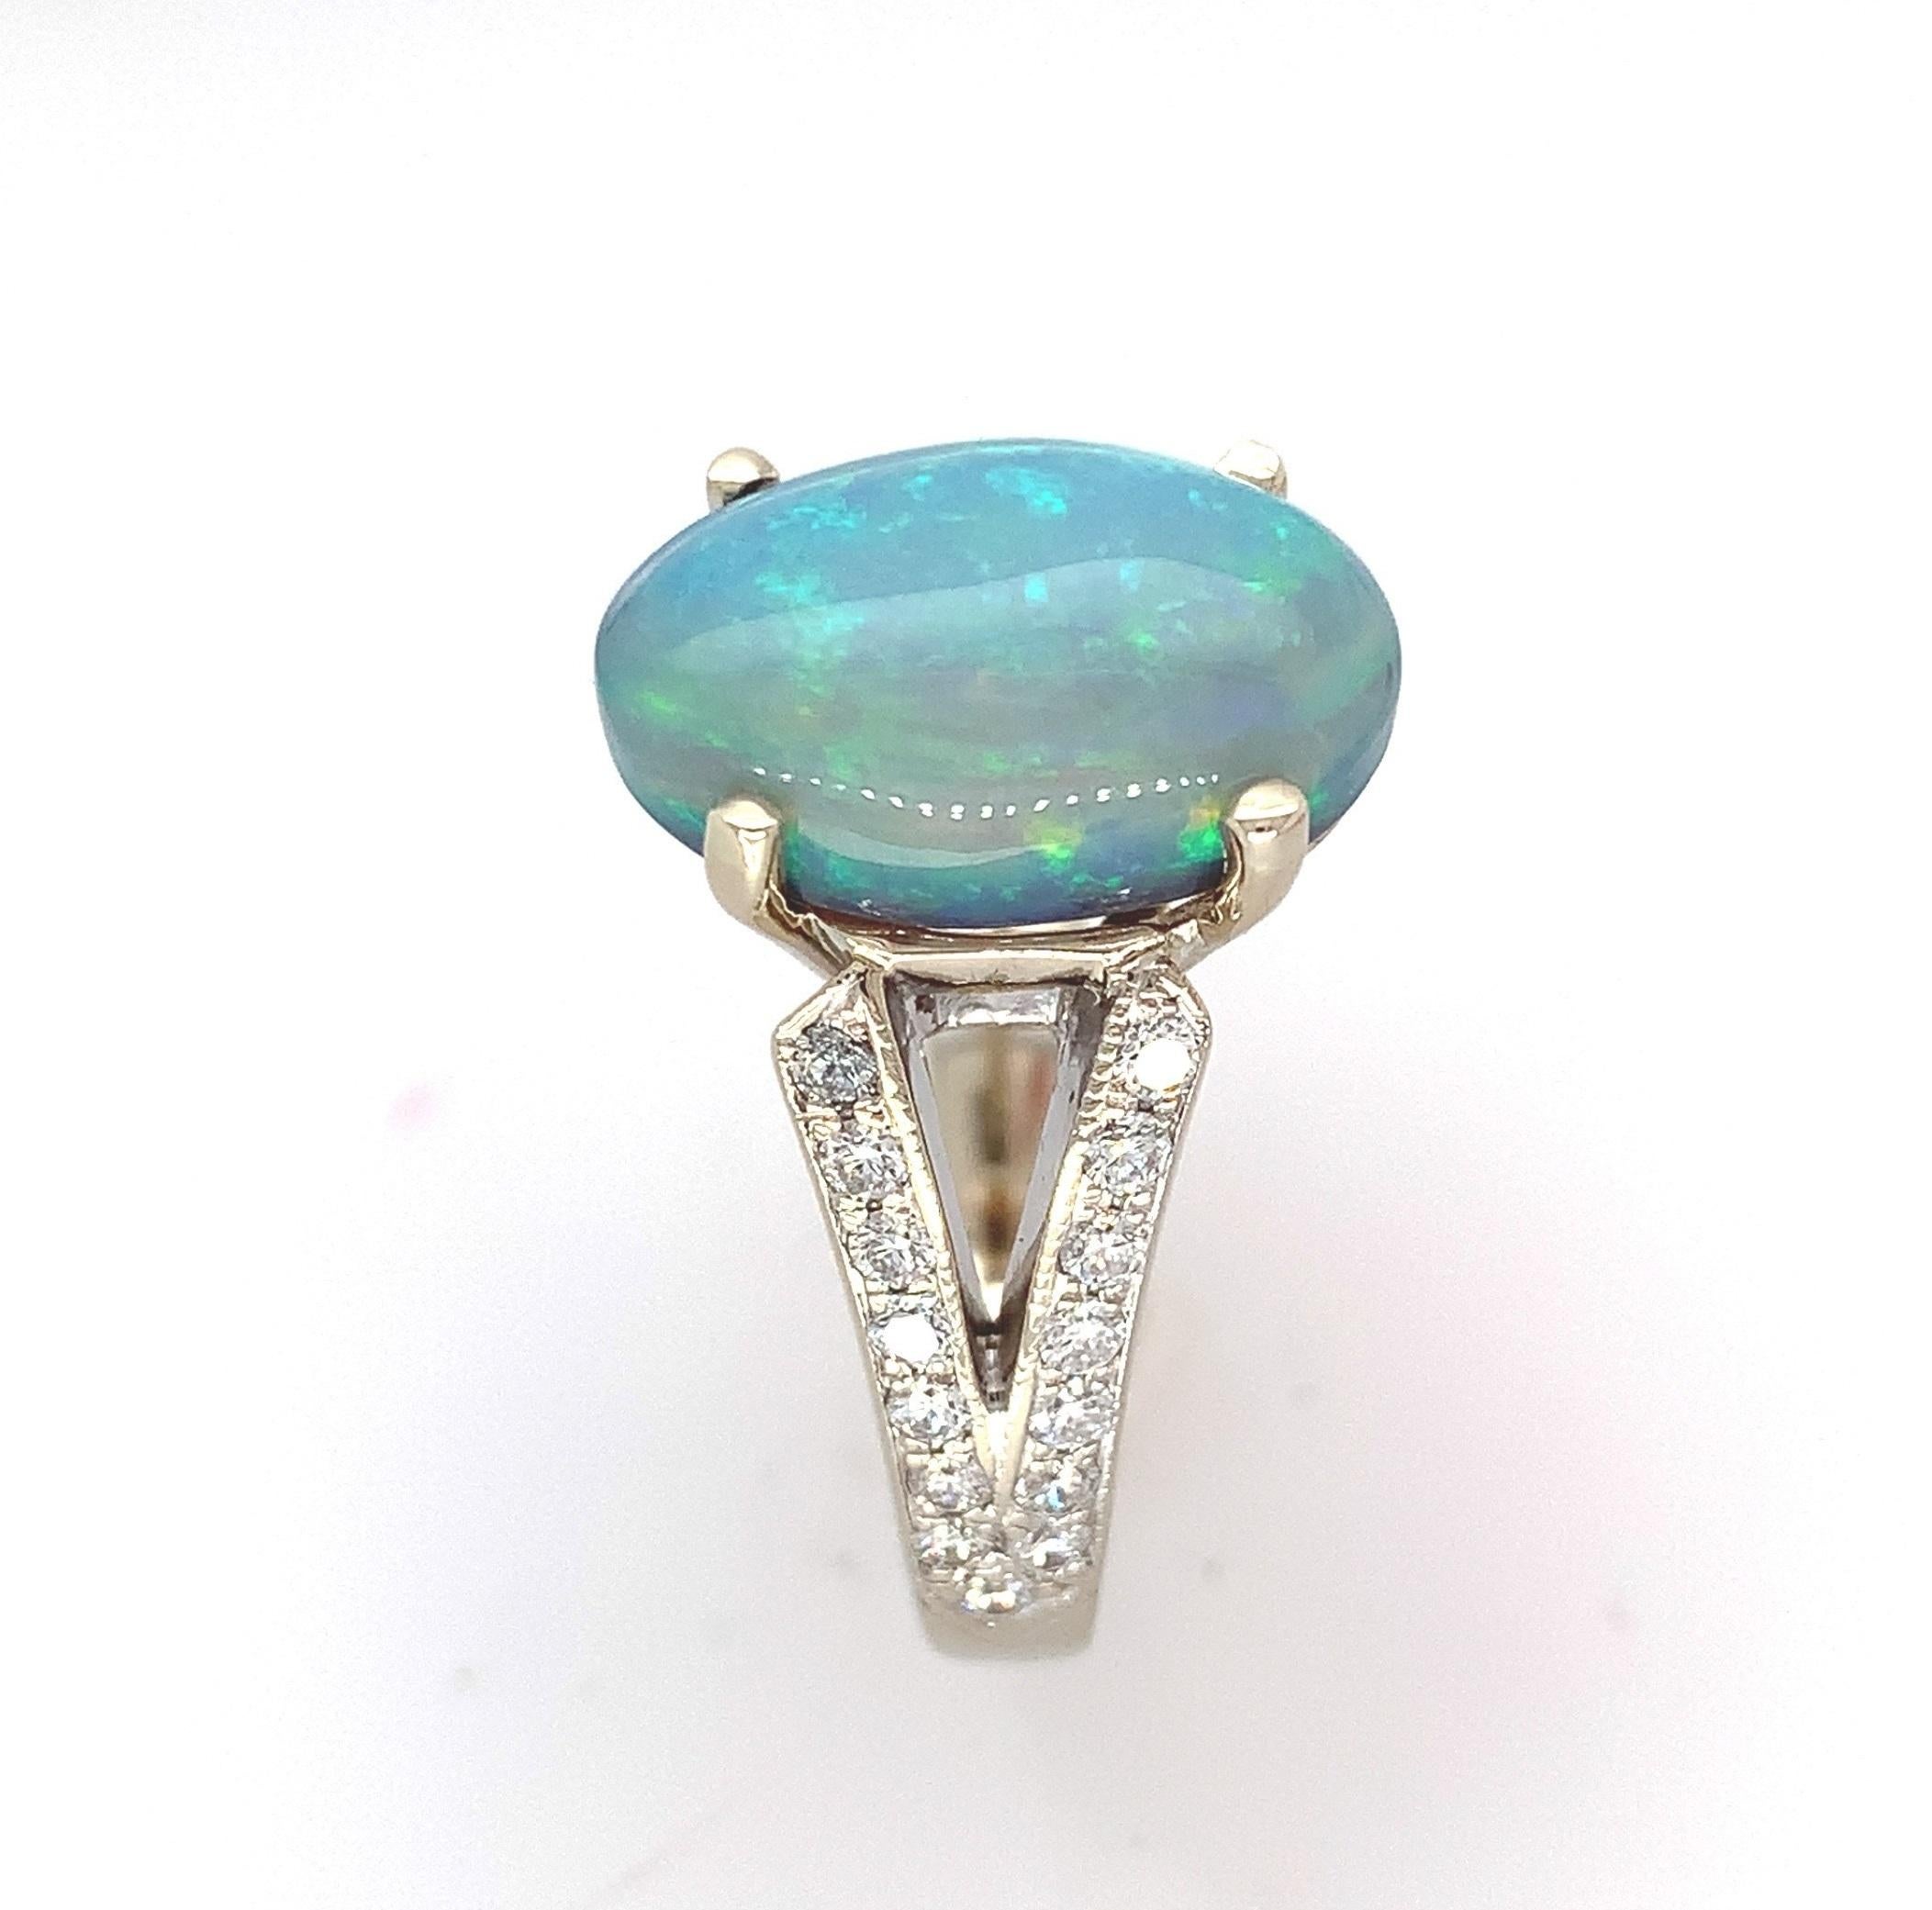 
18K white gold Australian black opal and diamond ring. There is a GIA report #2225667539 stating natural color opal weighing 4.39 carats and measuring 14.13mm x 9.31mm x 5.35mm. The opal has a grey body color with some black base and primarily